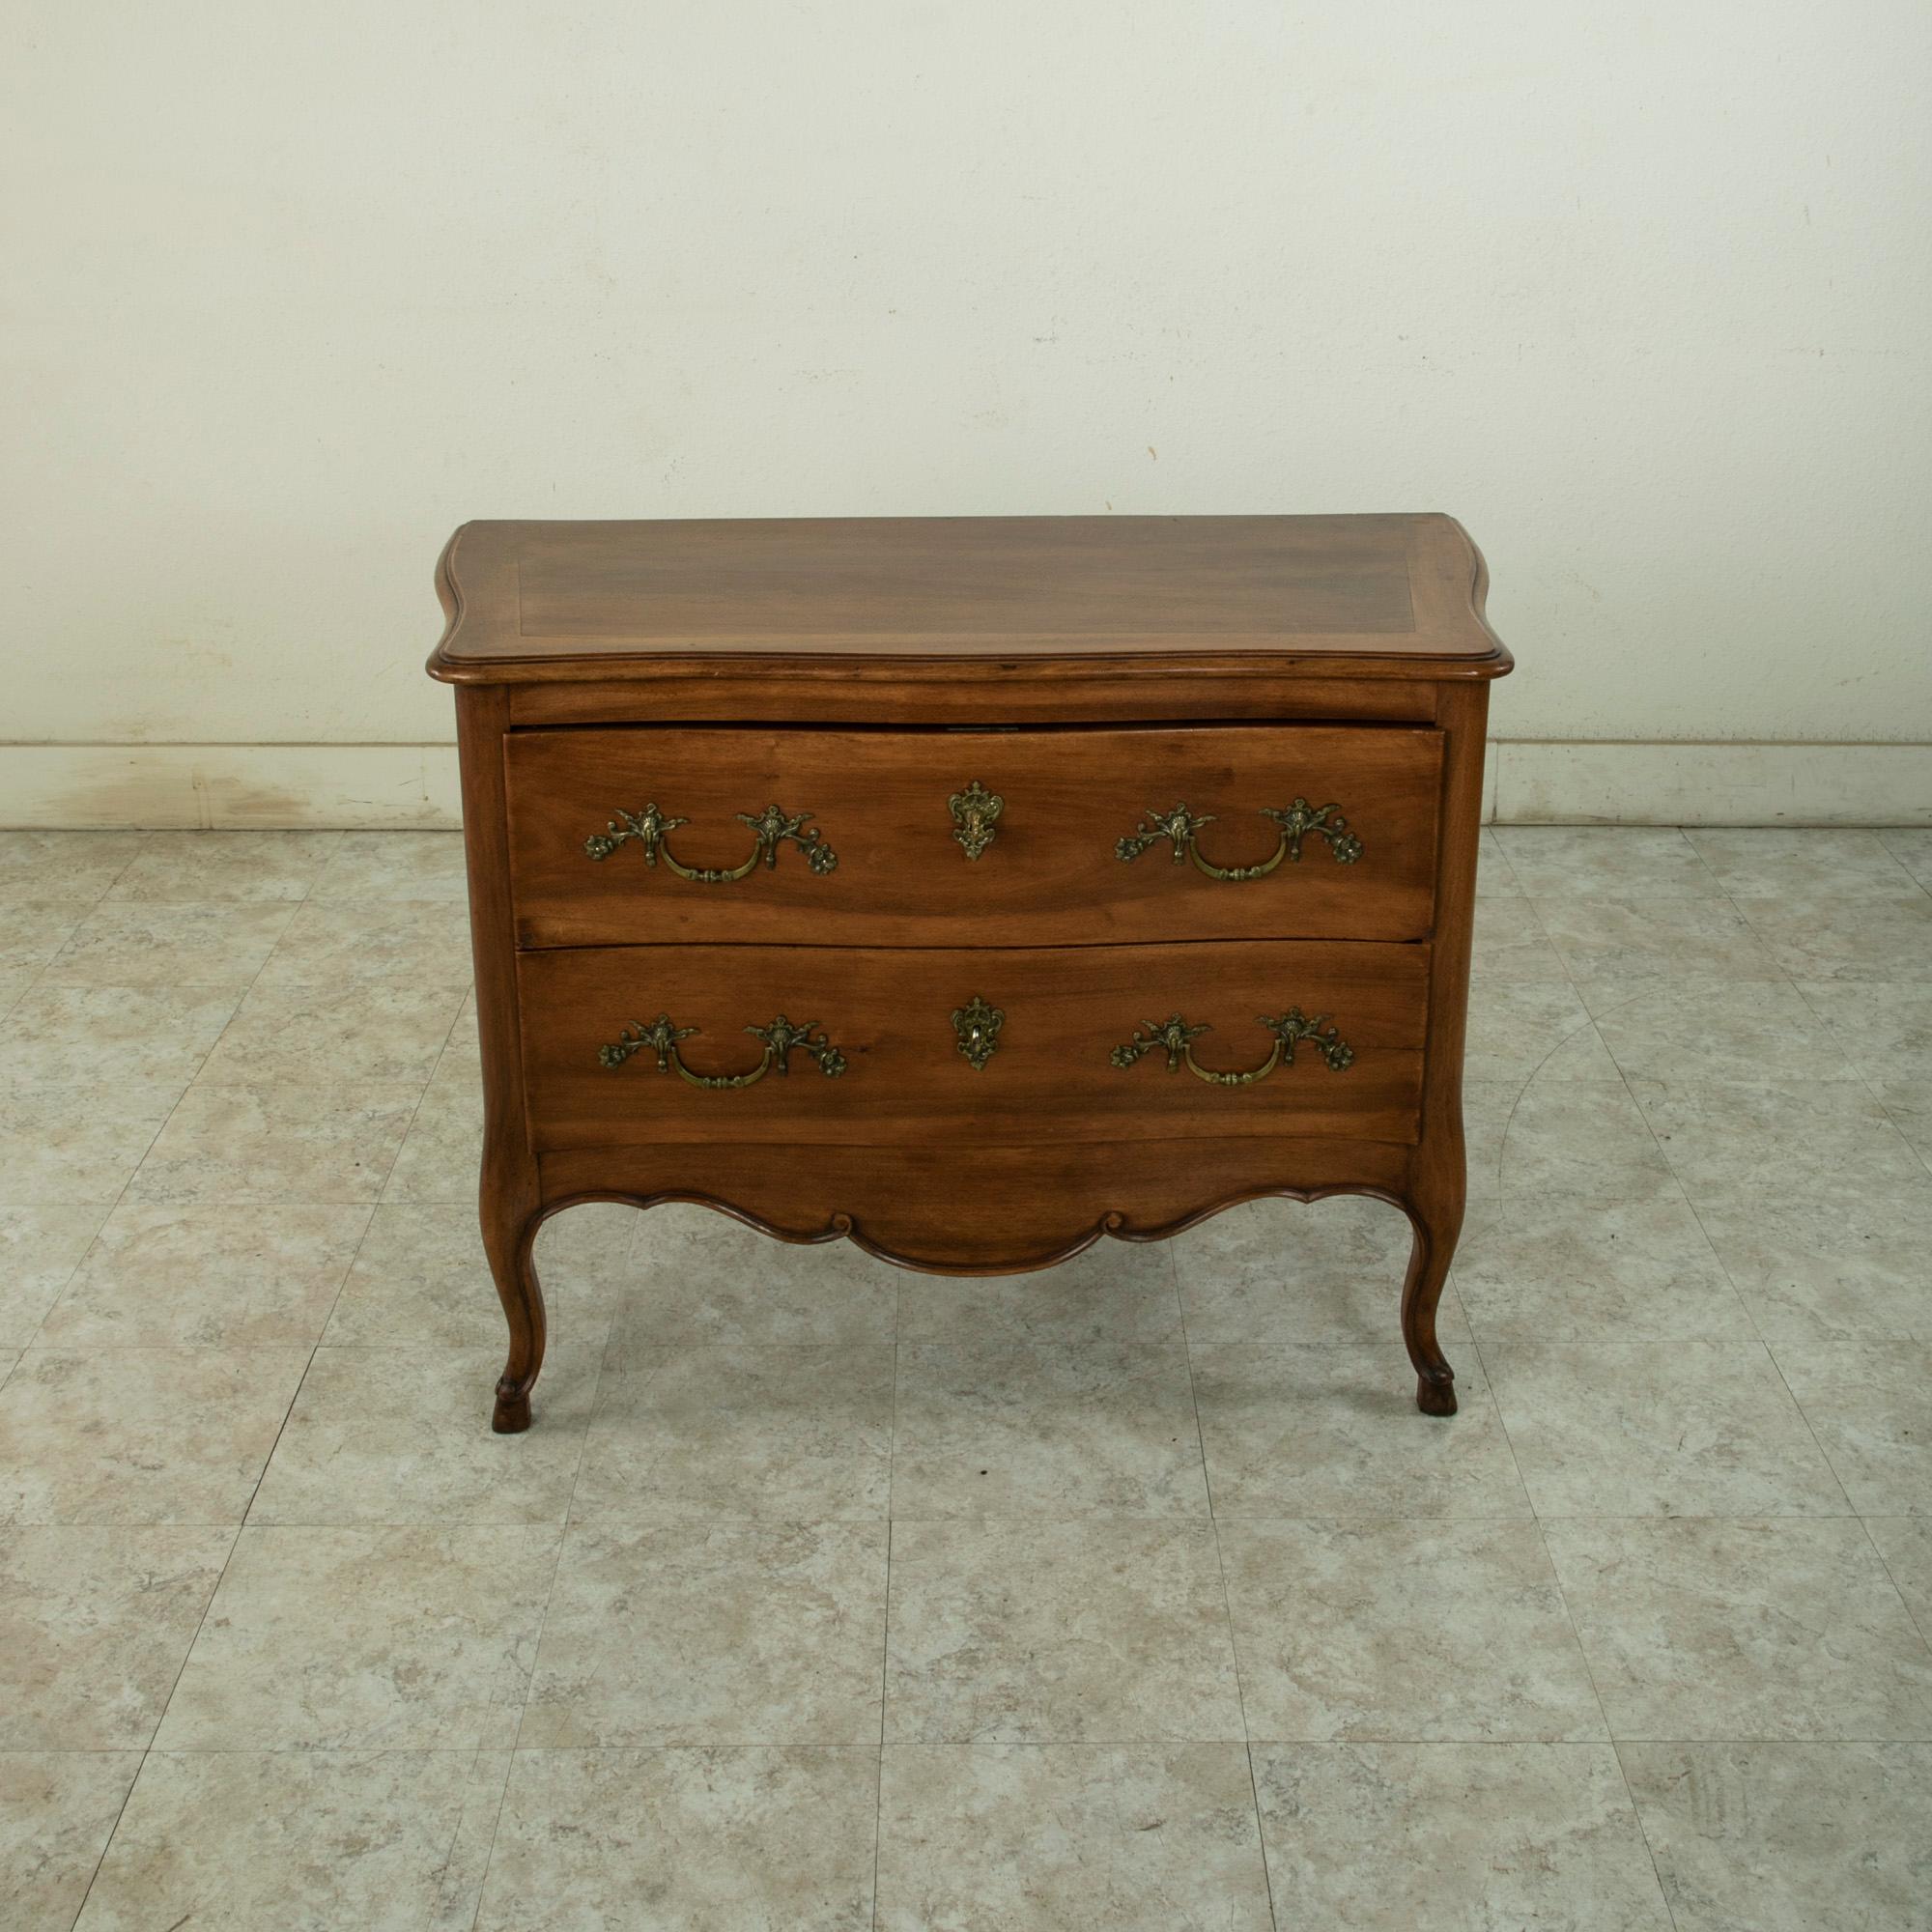 This early twentieth century French Louis XV style commode or chest of drawers is constructed of solid walnut. This piece is called a sauteuse in French, or jumping chest, due to its high legs. The chest features a beveled top and curved sides, and